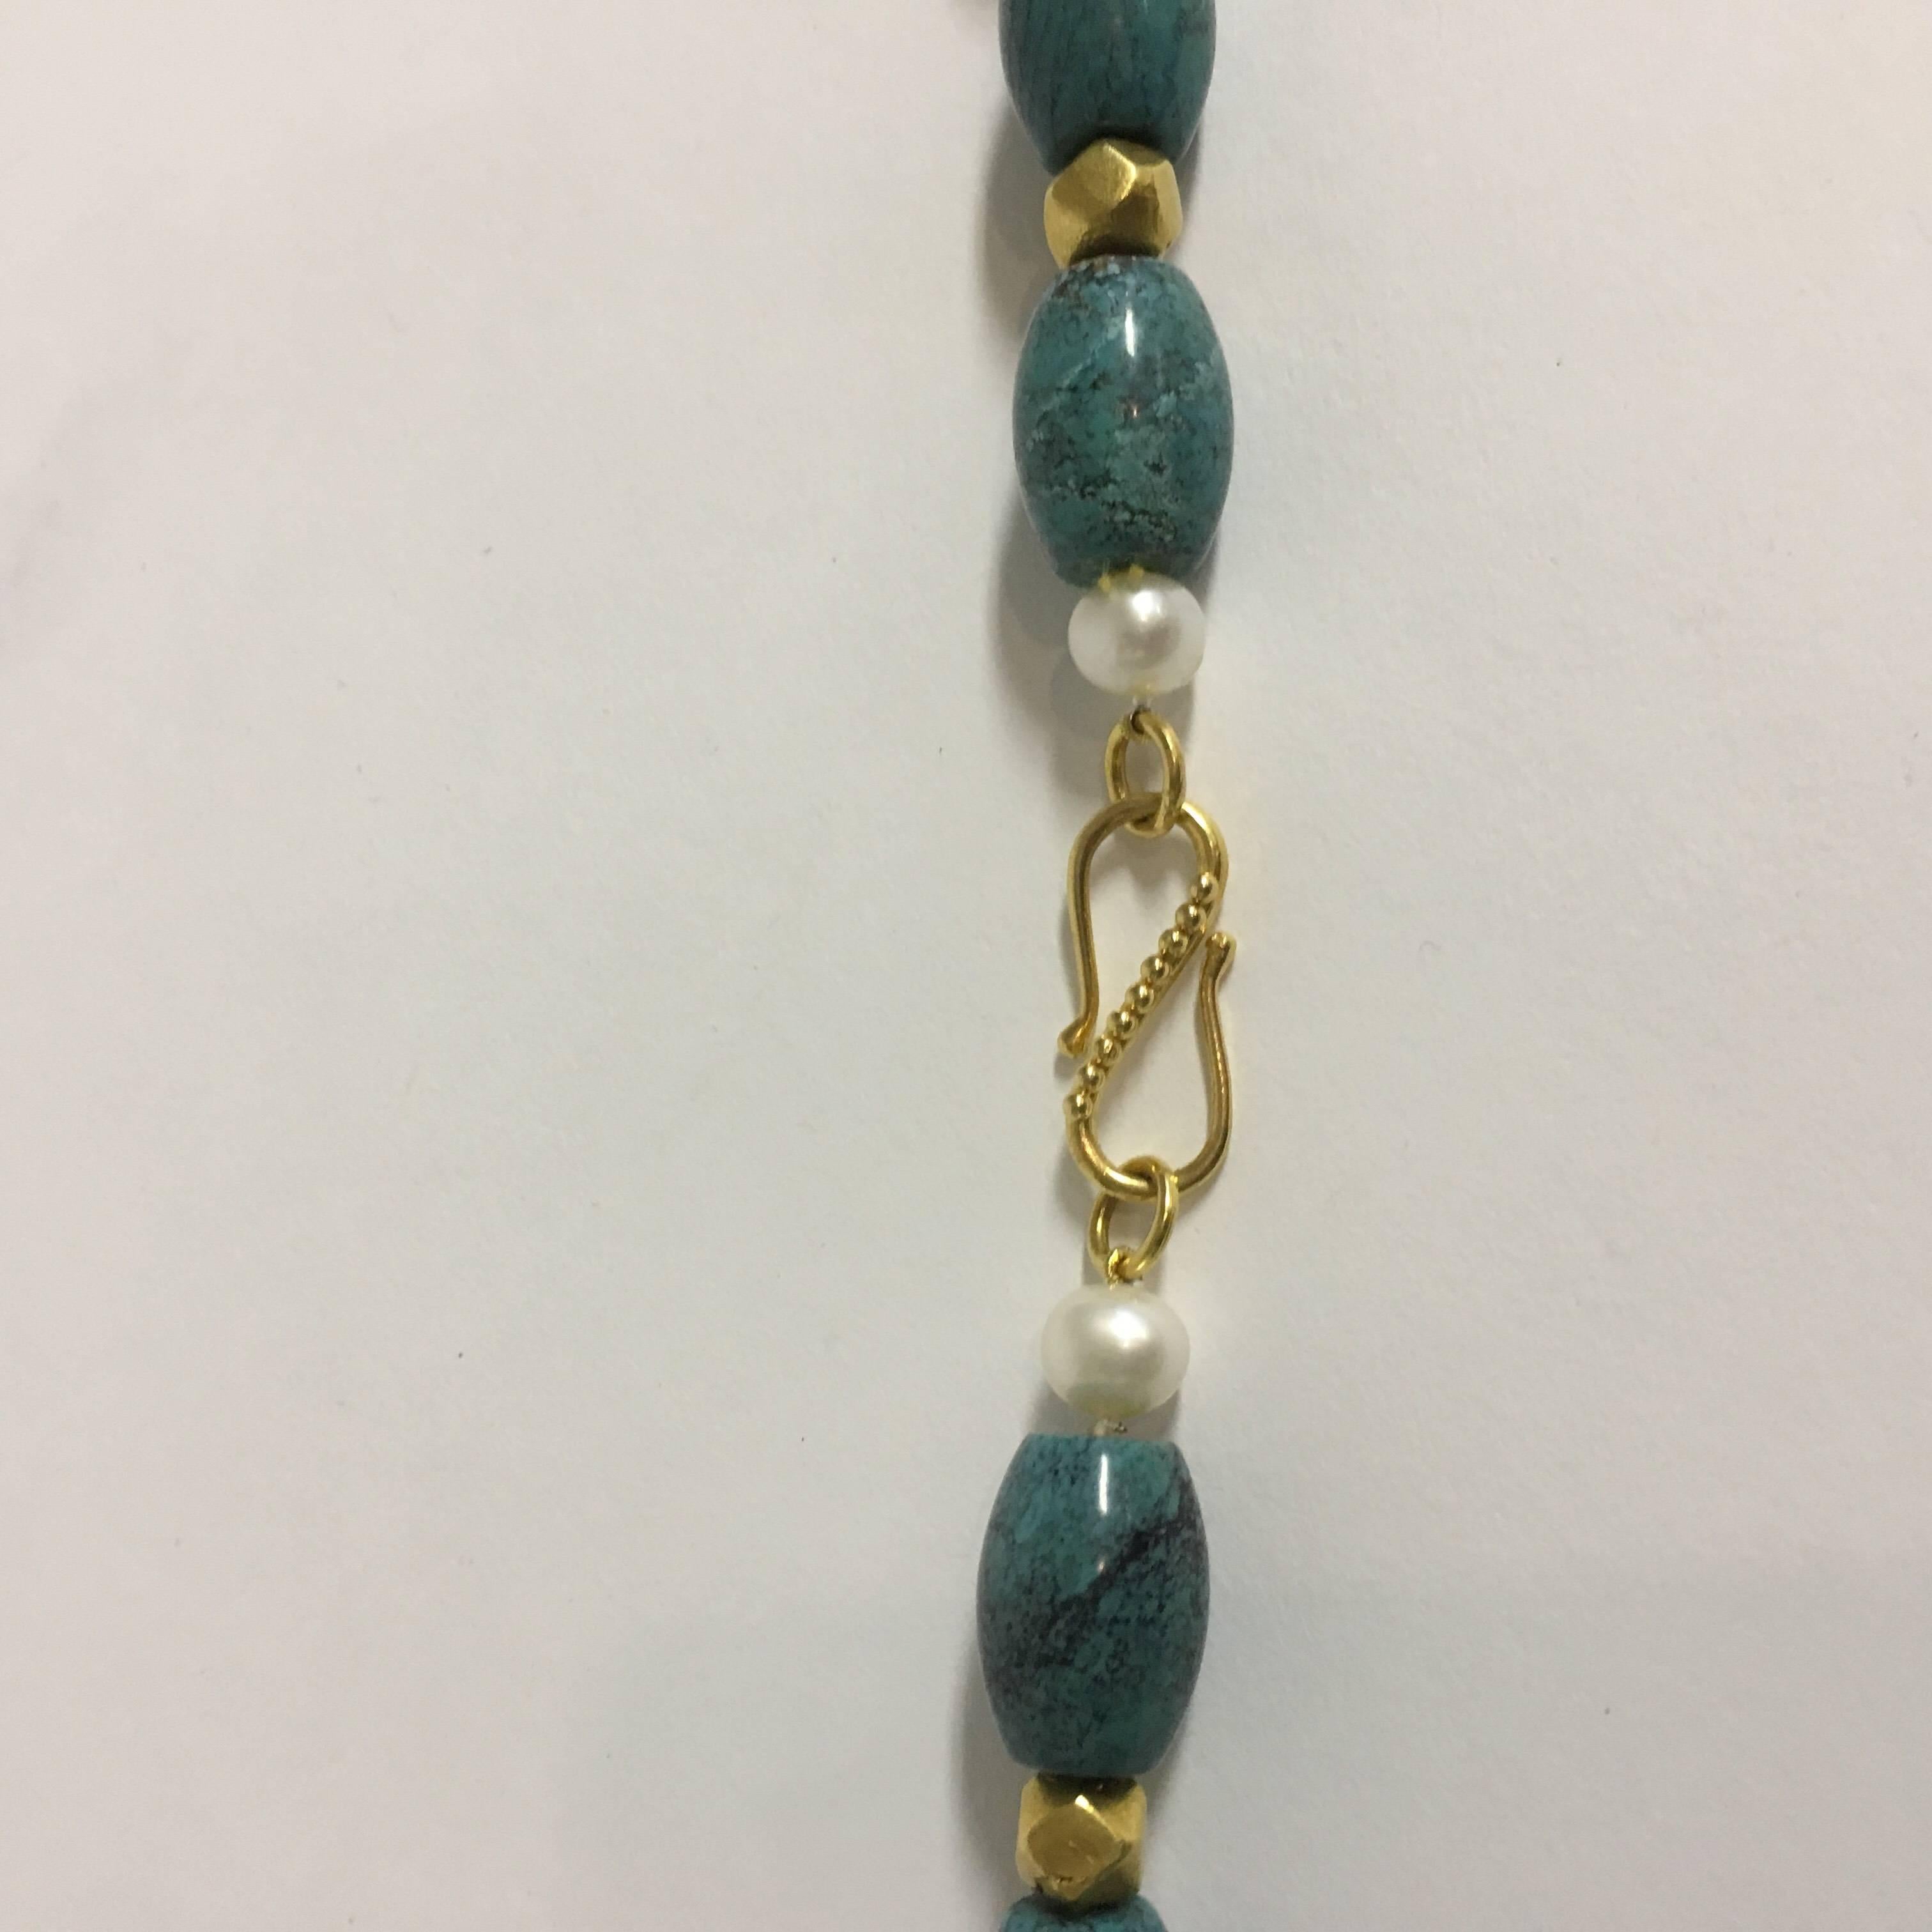 Contemporary Necklace Tibetan Turquoise, Freshwater Pearls, Seed Pearl & 18 Karat Gold Beads